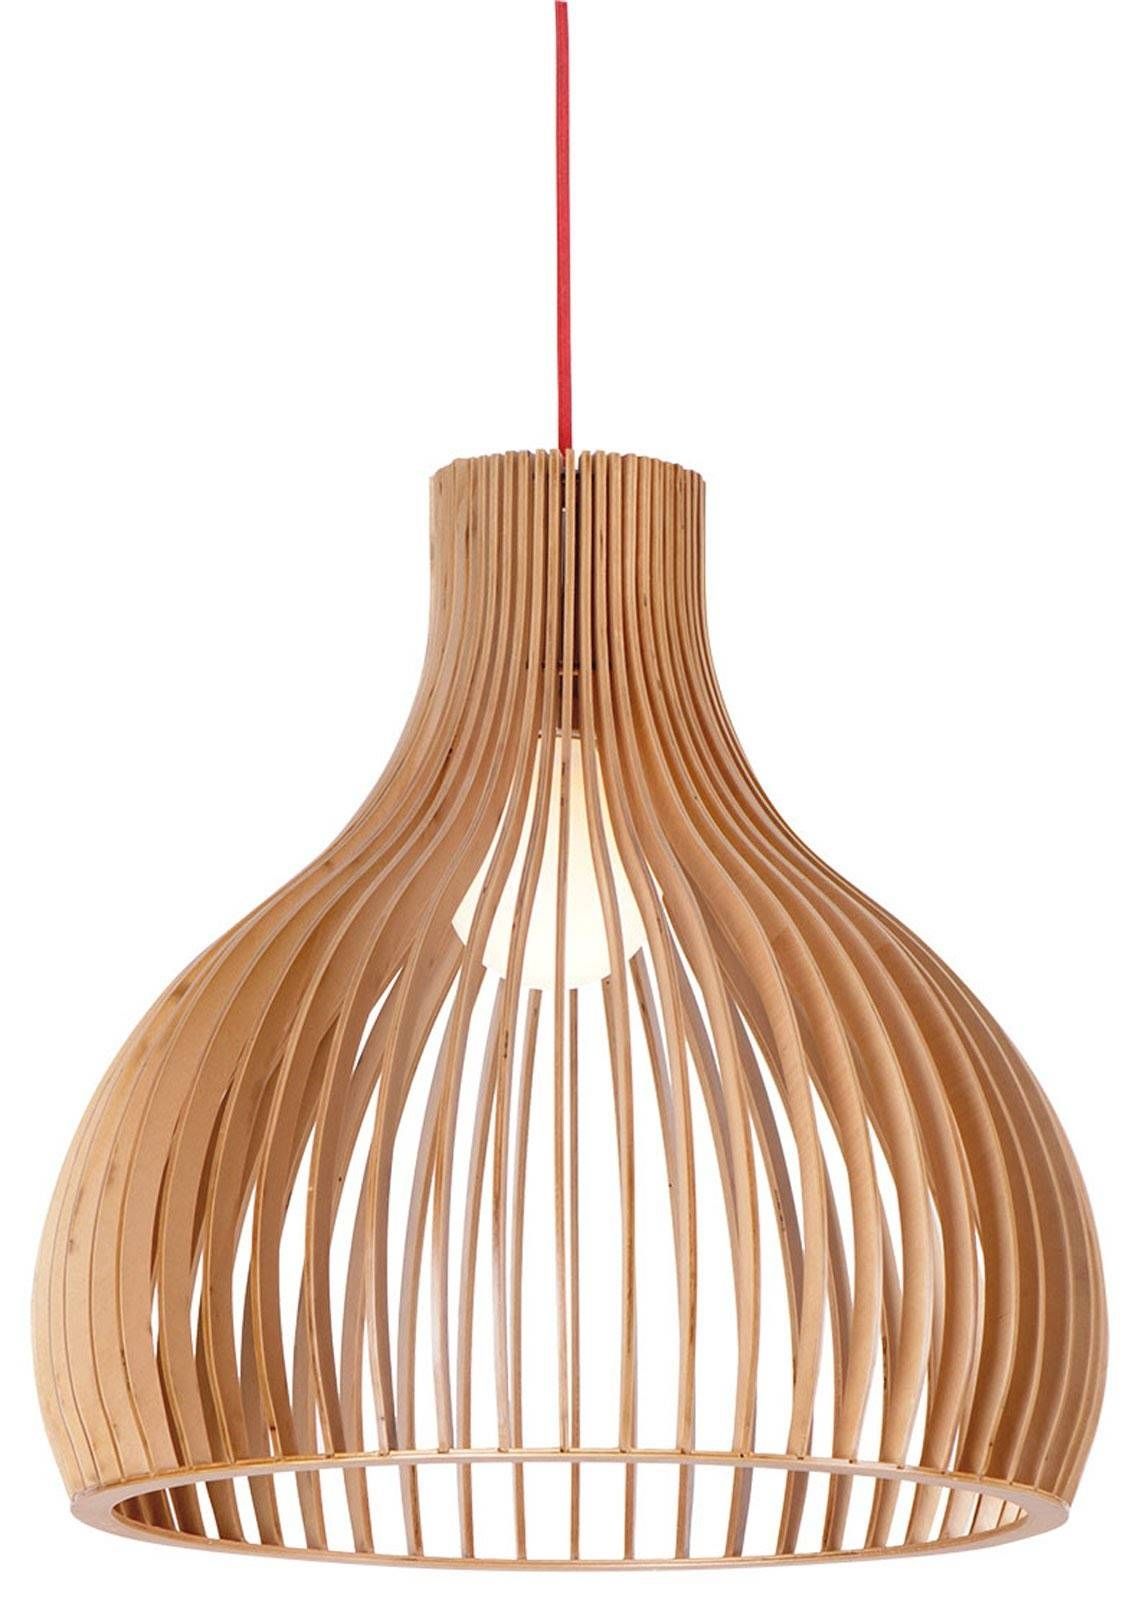 Buy Wood Pendant Light In Melbourne [malmo] – Youtube Regarding Bentwood Lighting (View 3 of 15)